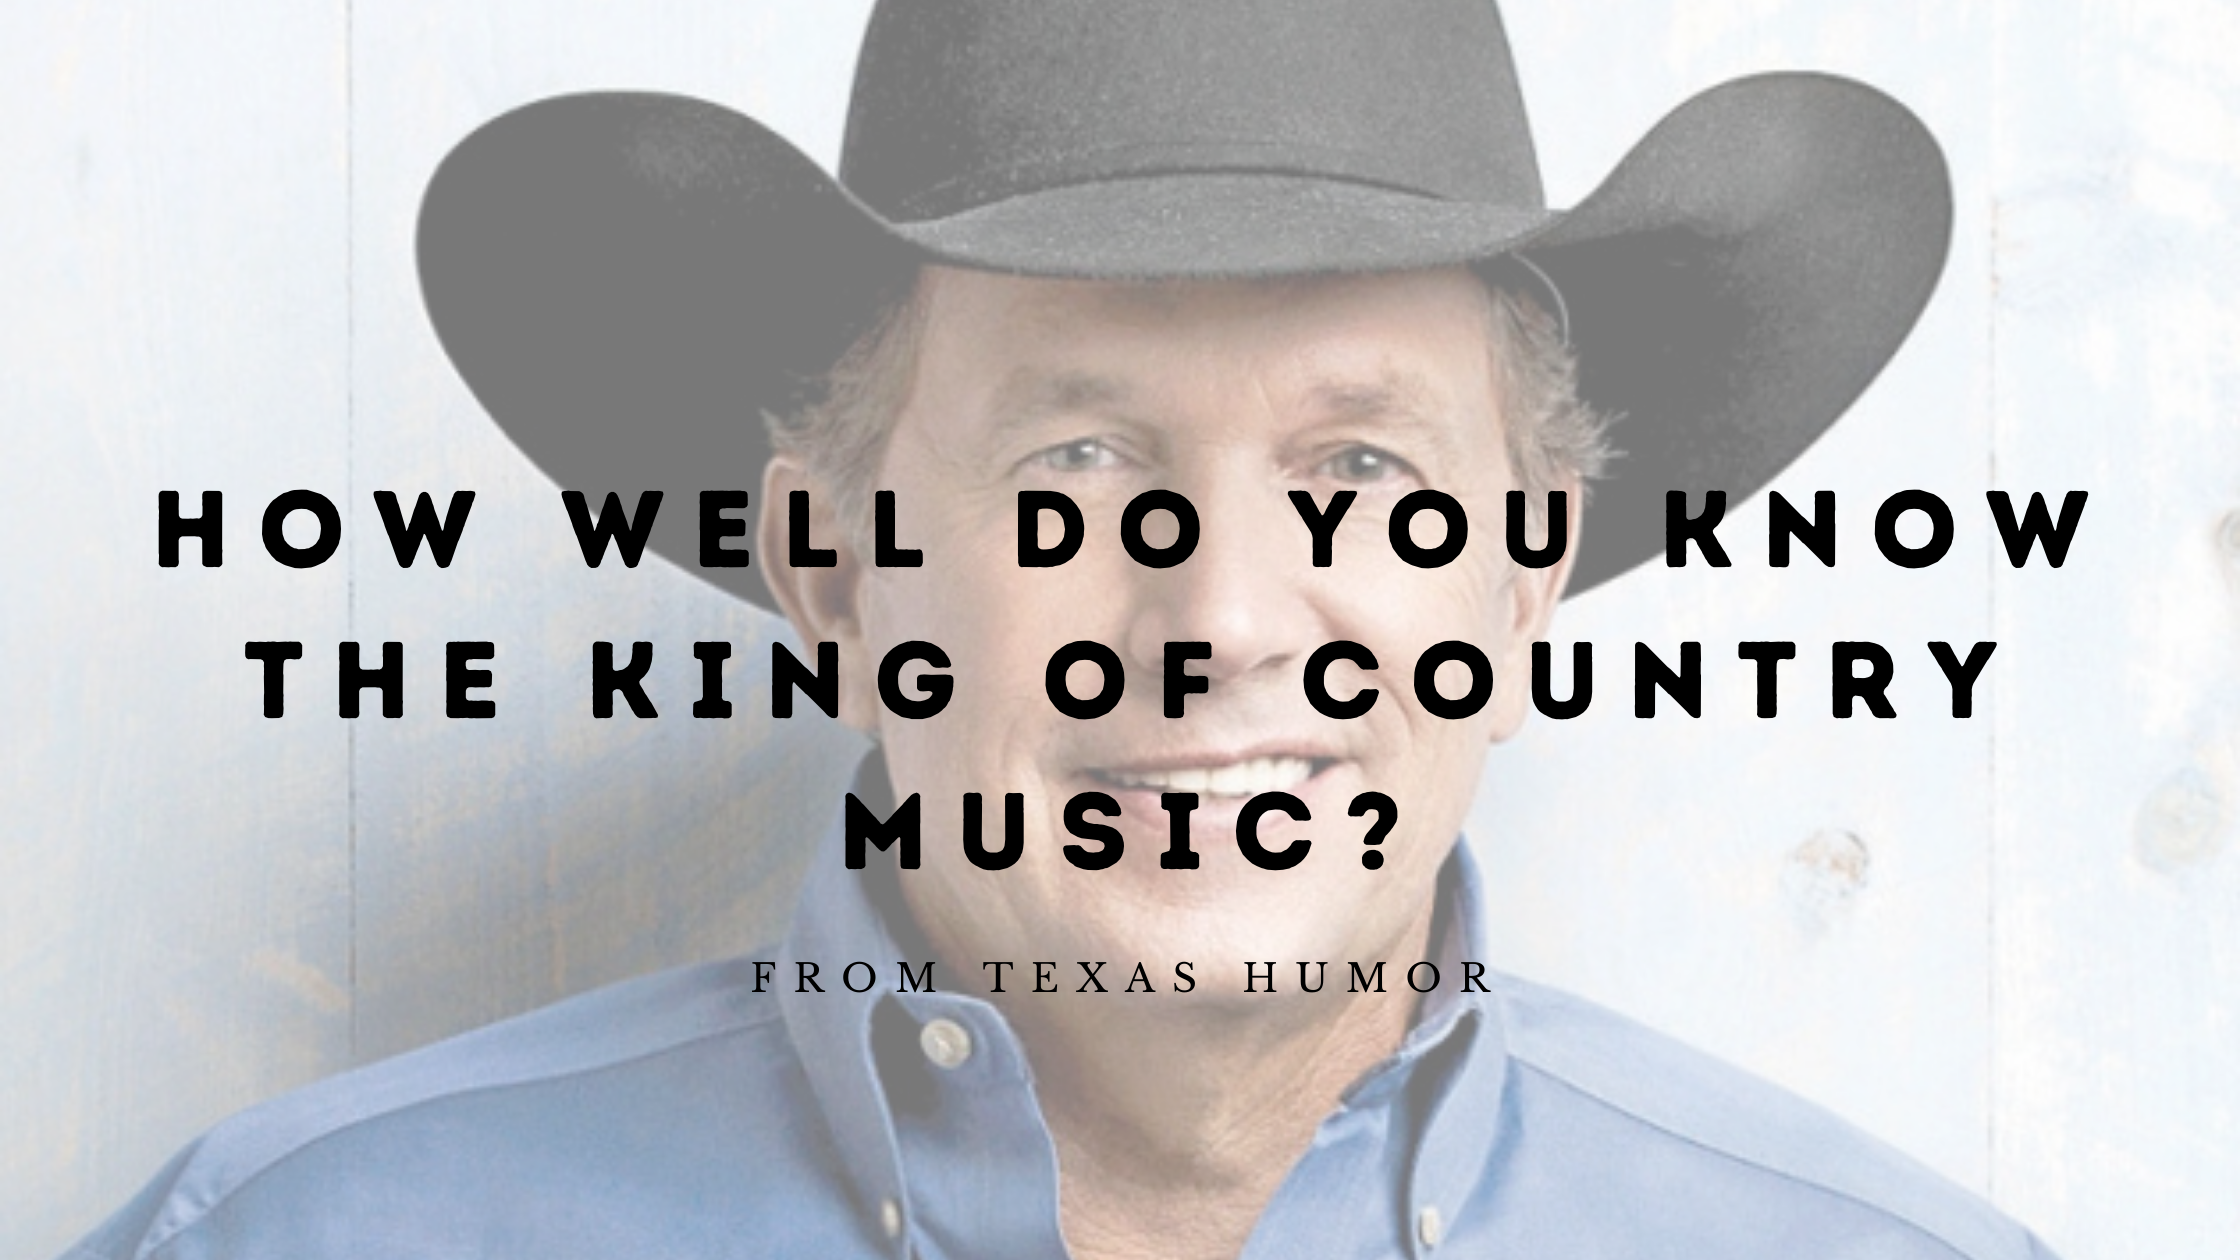 How Well Do You Know the King of Country Music?